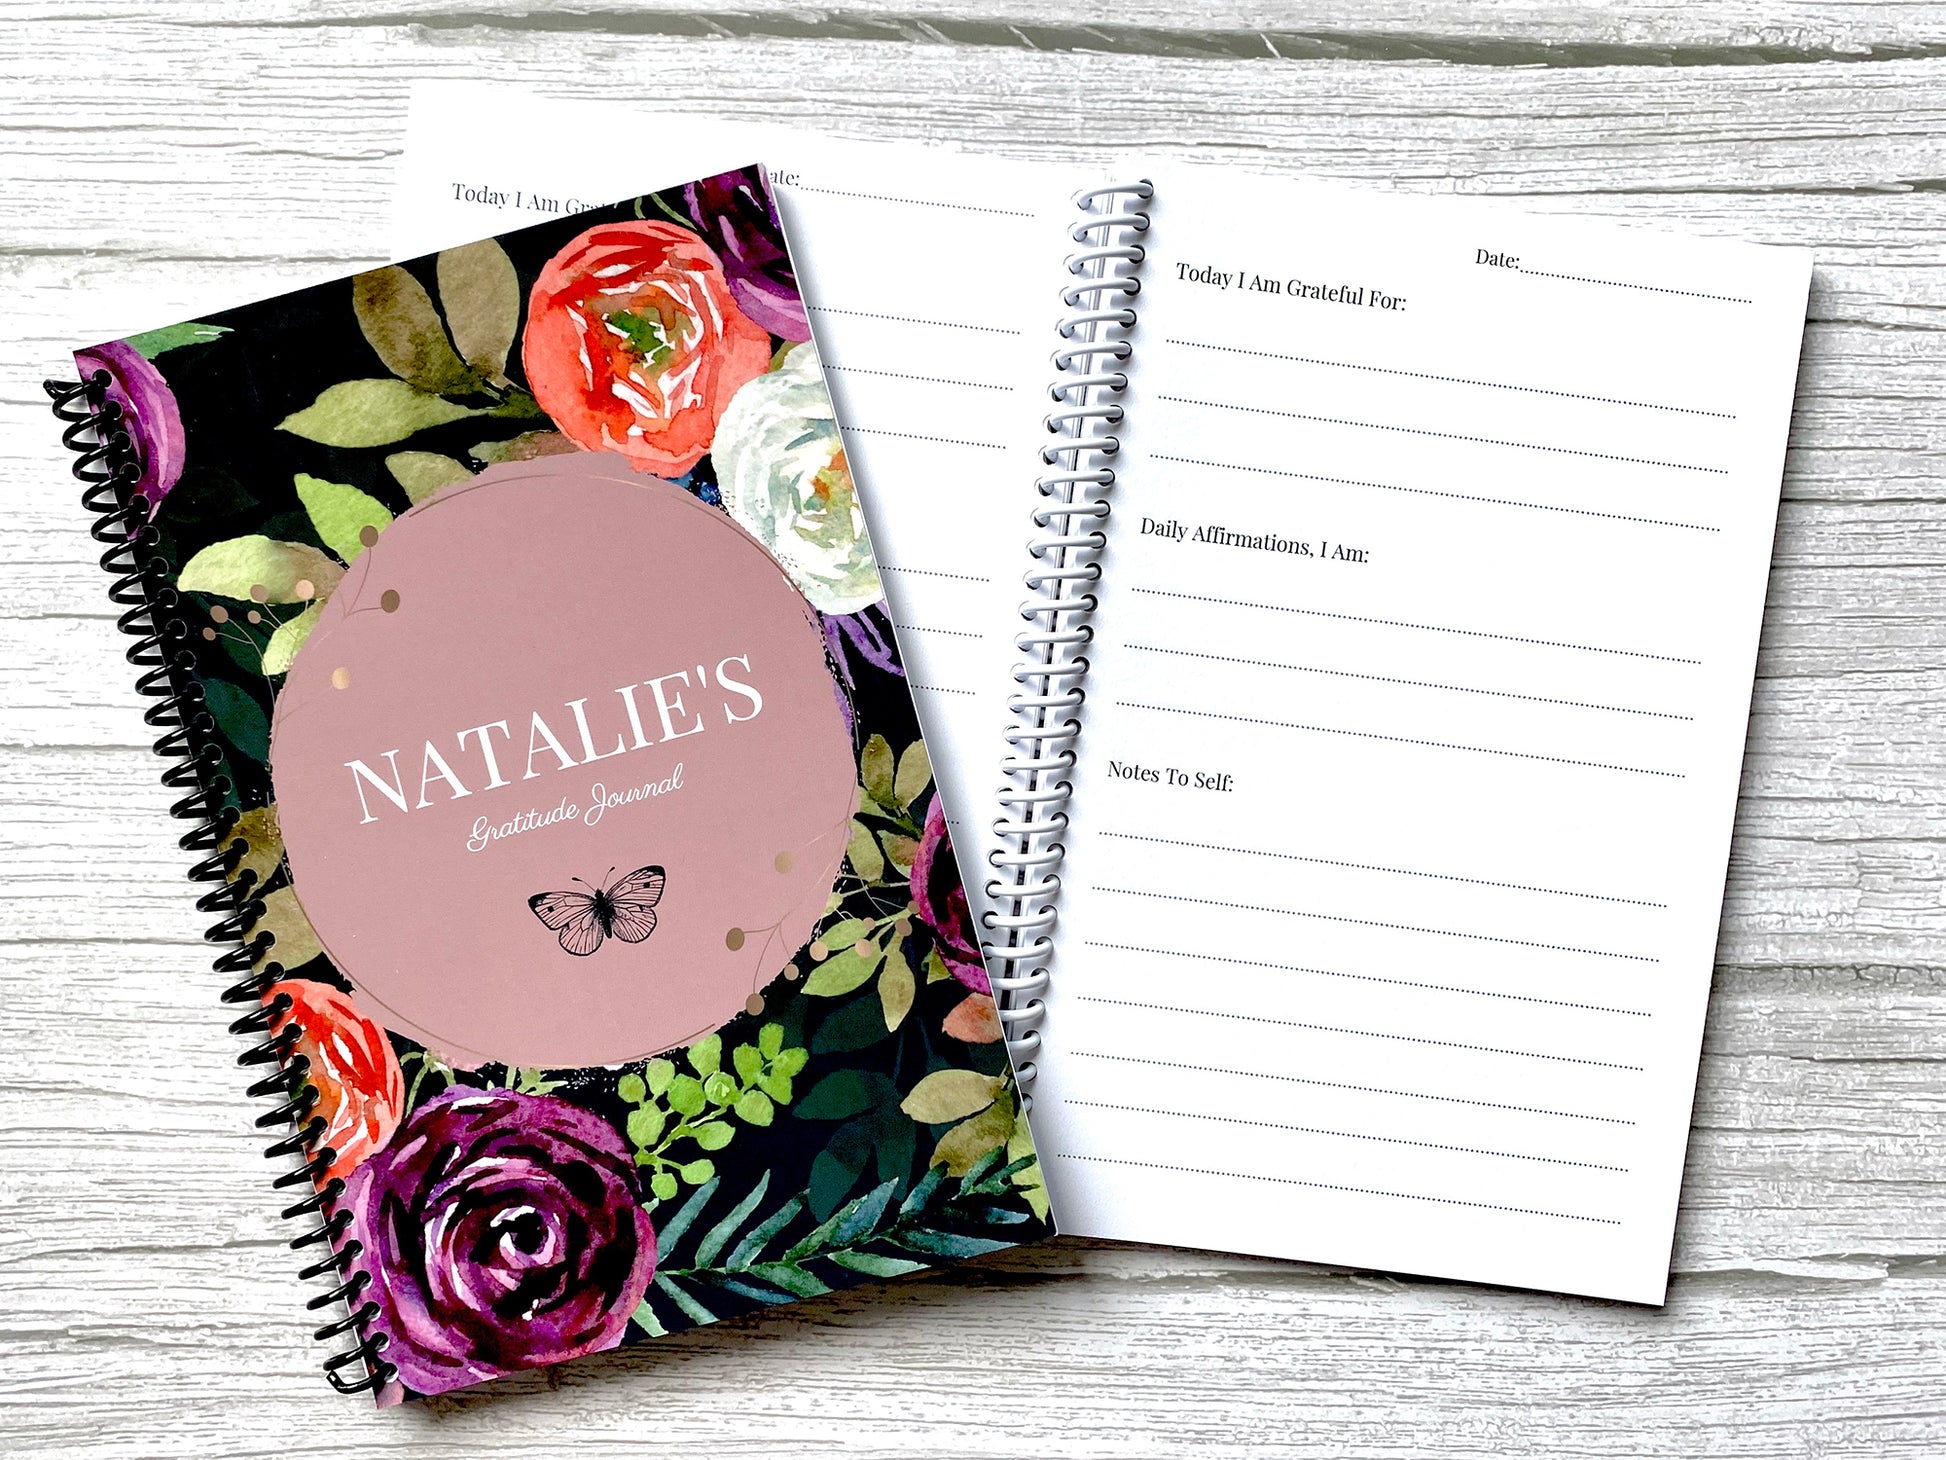 Personalized Daily Journal, Gratitude Journal - Luhvee Books